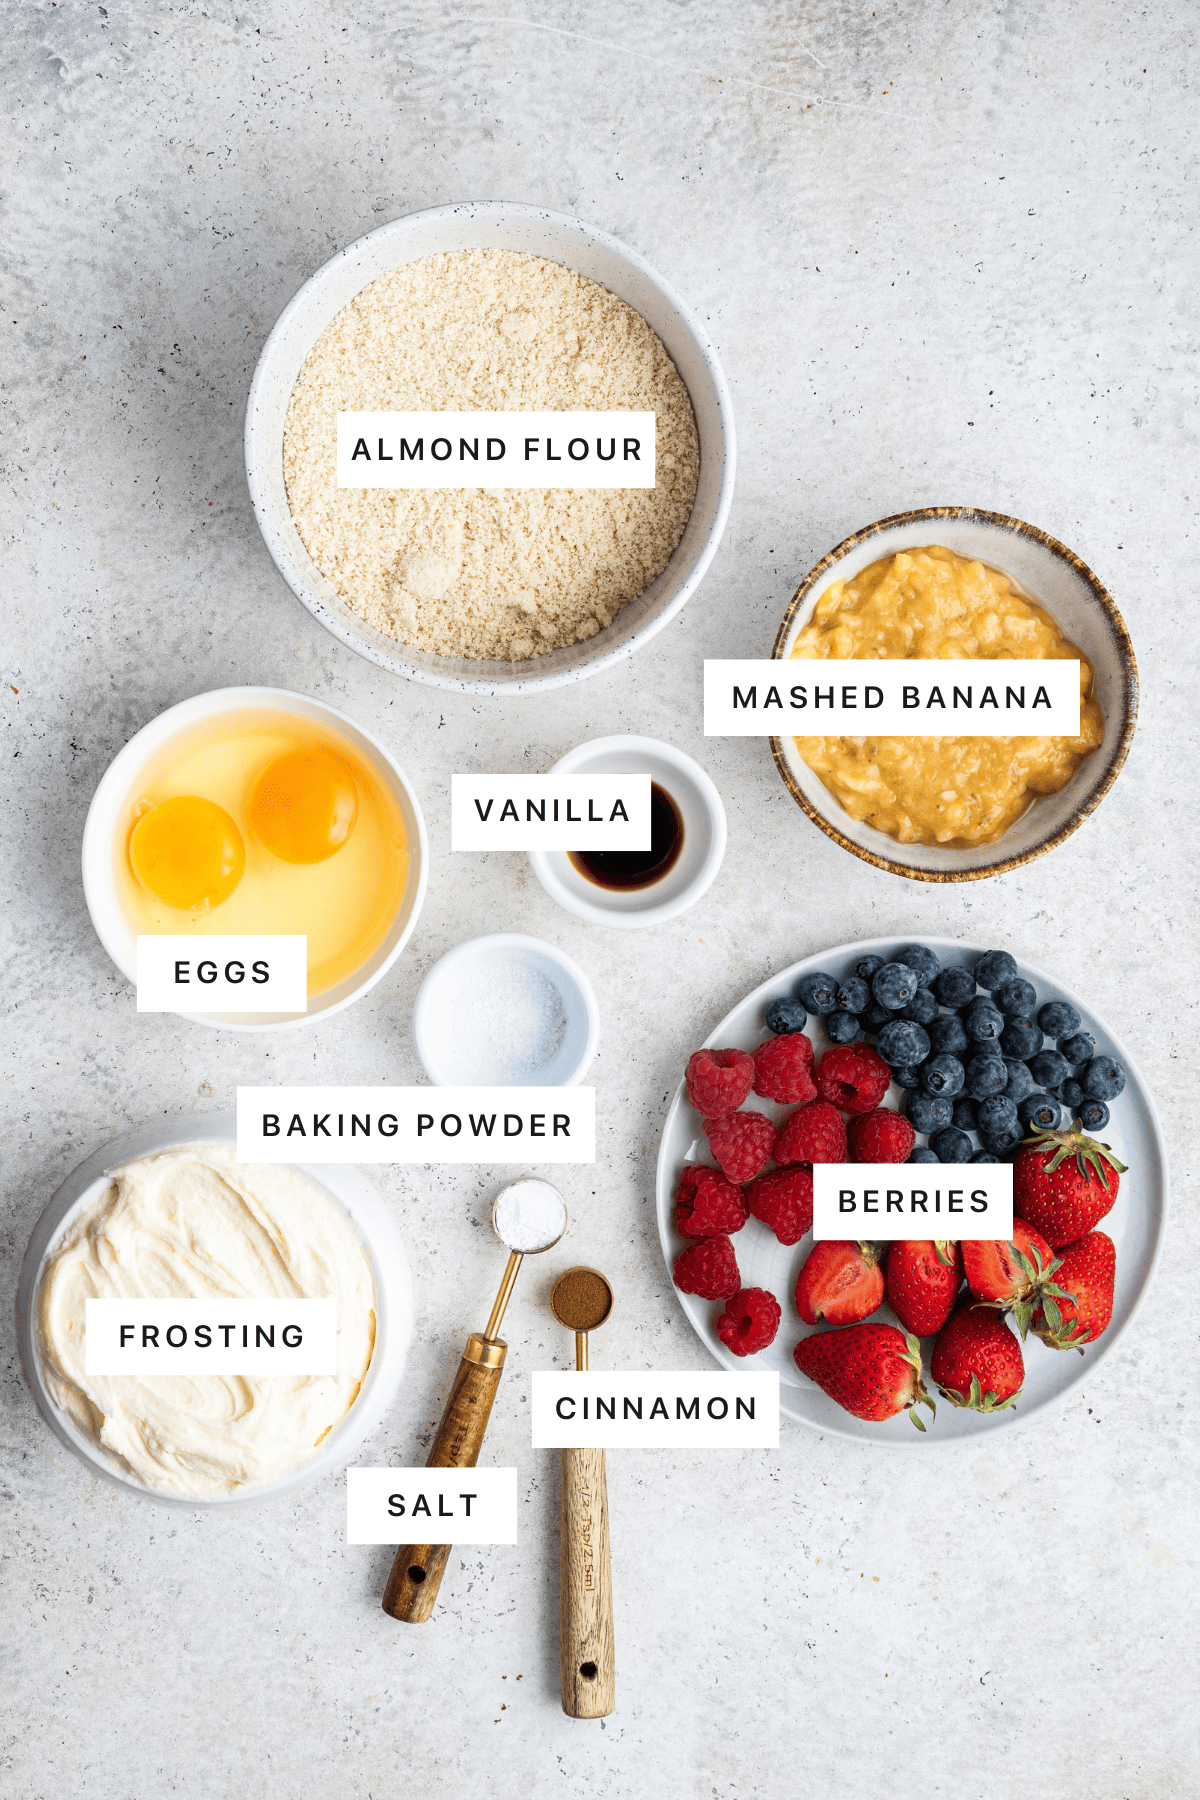 Ingredients for the healthy smash cake: almond flour, mashed banana, eggs, vanilla, baking powder, salt, cinnamon, berries and frosting.